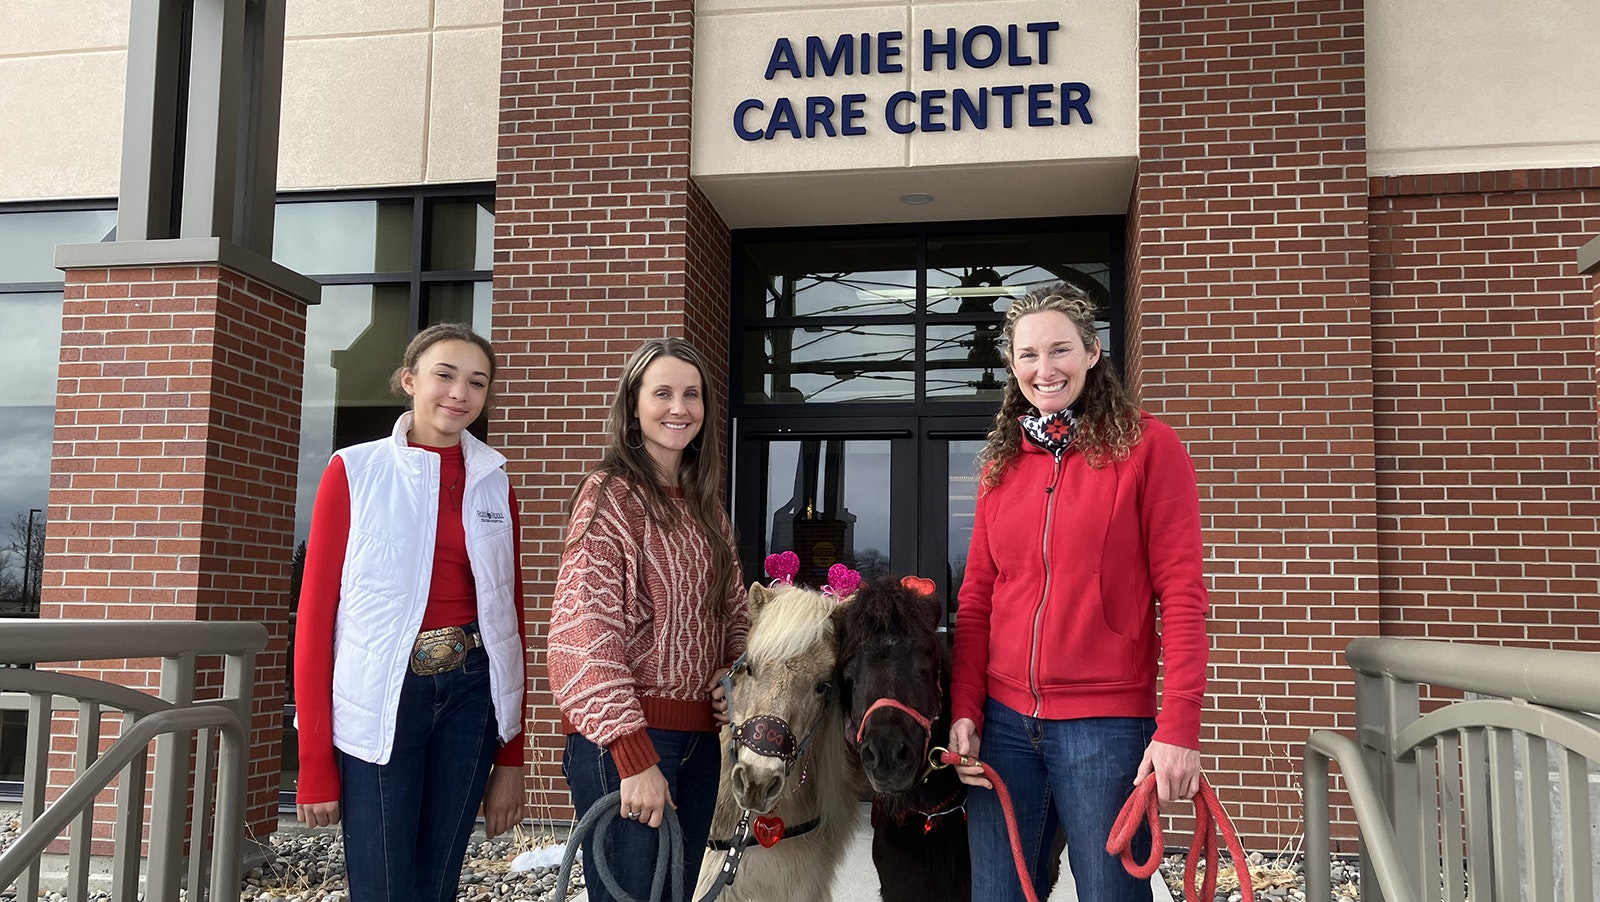 Bringing Valentine’s Day happiness to residents of the Amie Holt Care Center in Buffalo on Monday was the goal of Kamryn Carden, left, Nicole Henry, Tootsie Roll, Chip and Candice Carden.